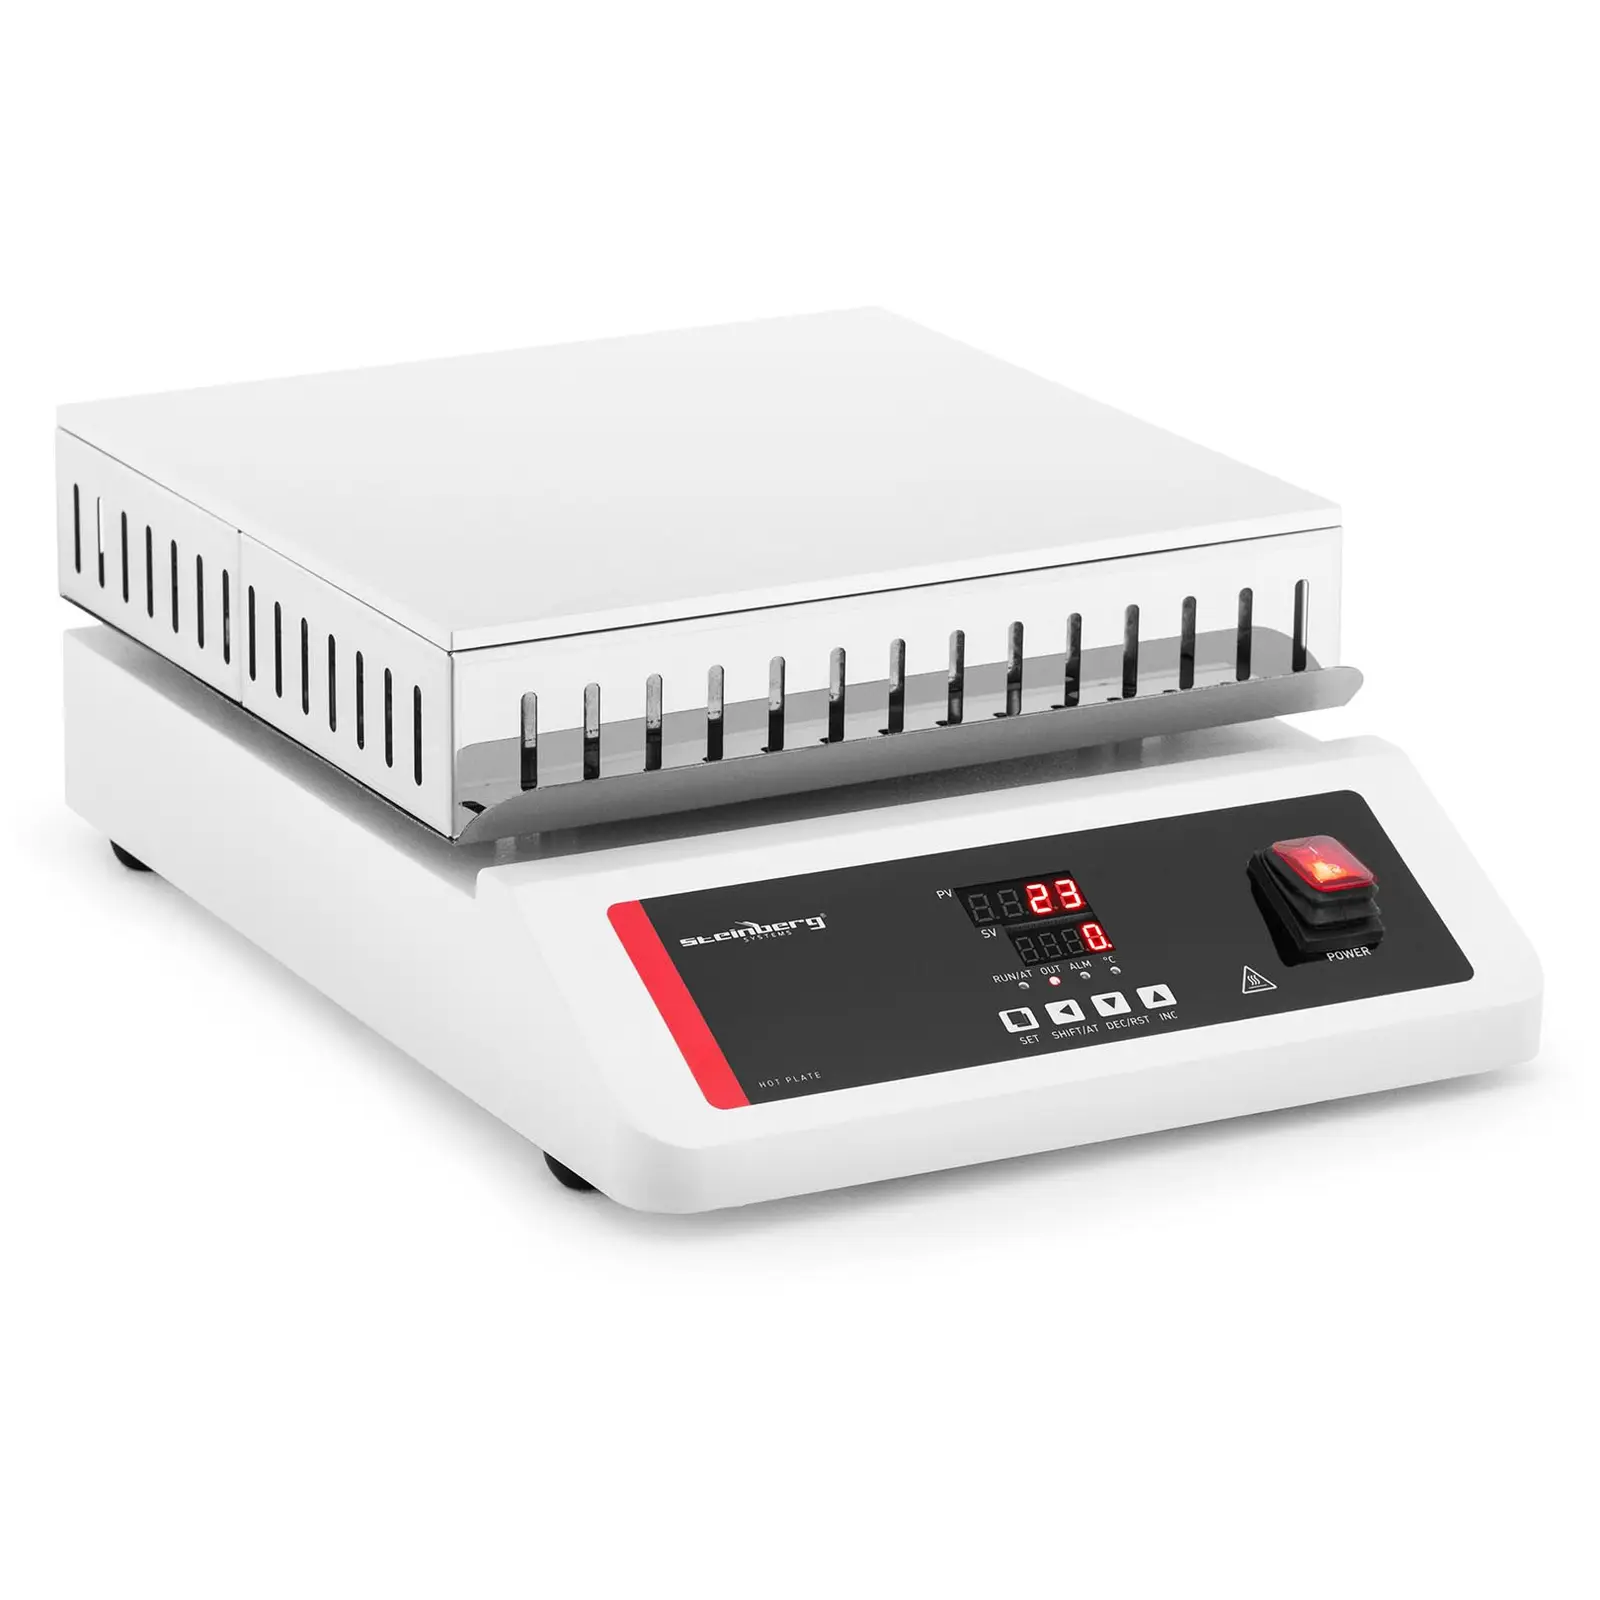 Hot plate laboratory - 30 x 30 cm - up to 350 °C - 20 kg